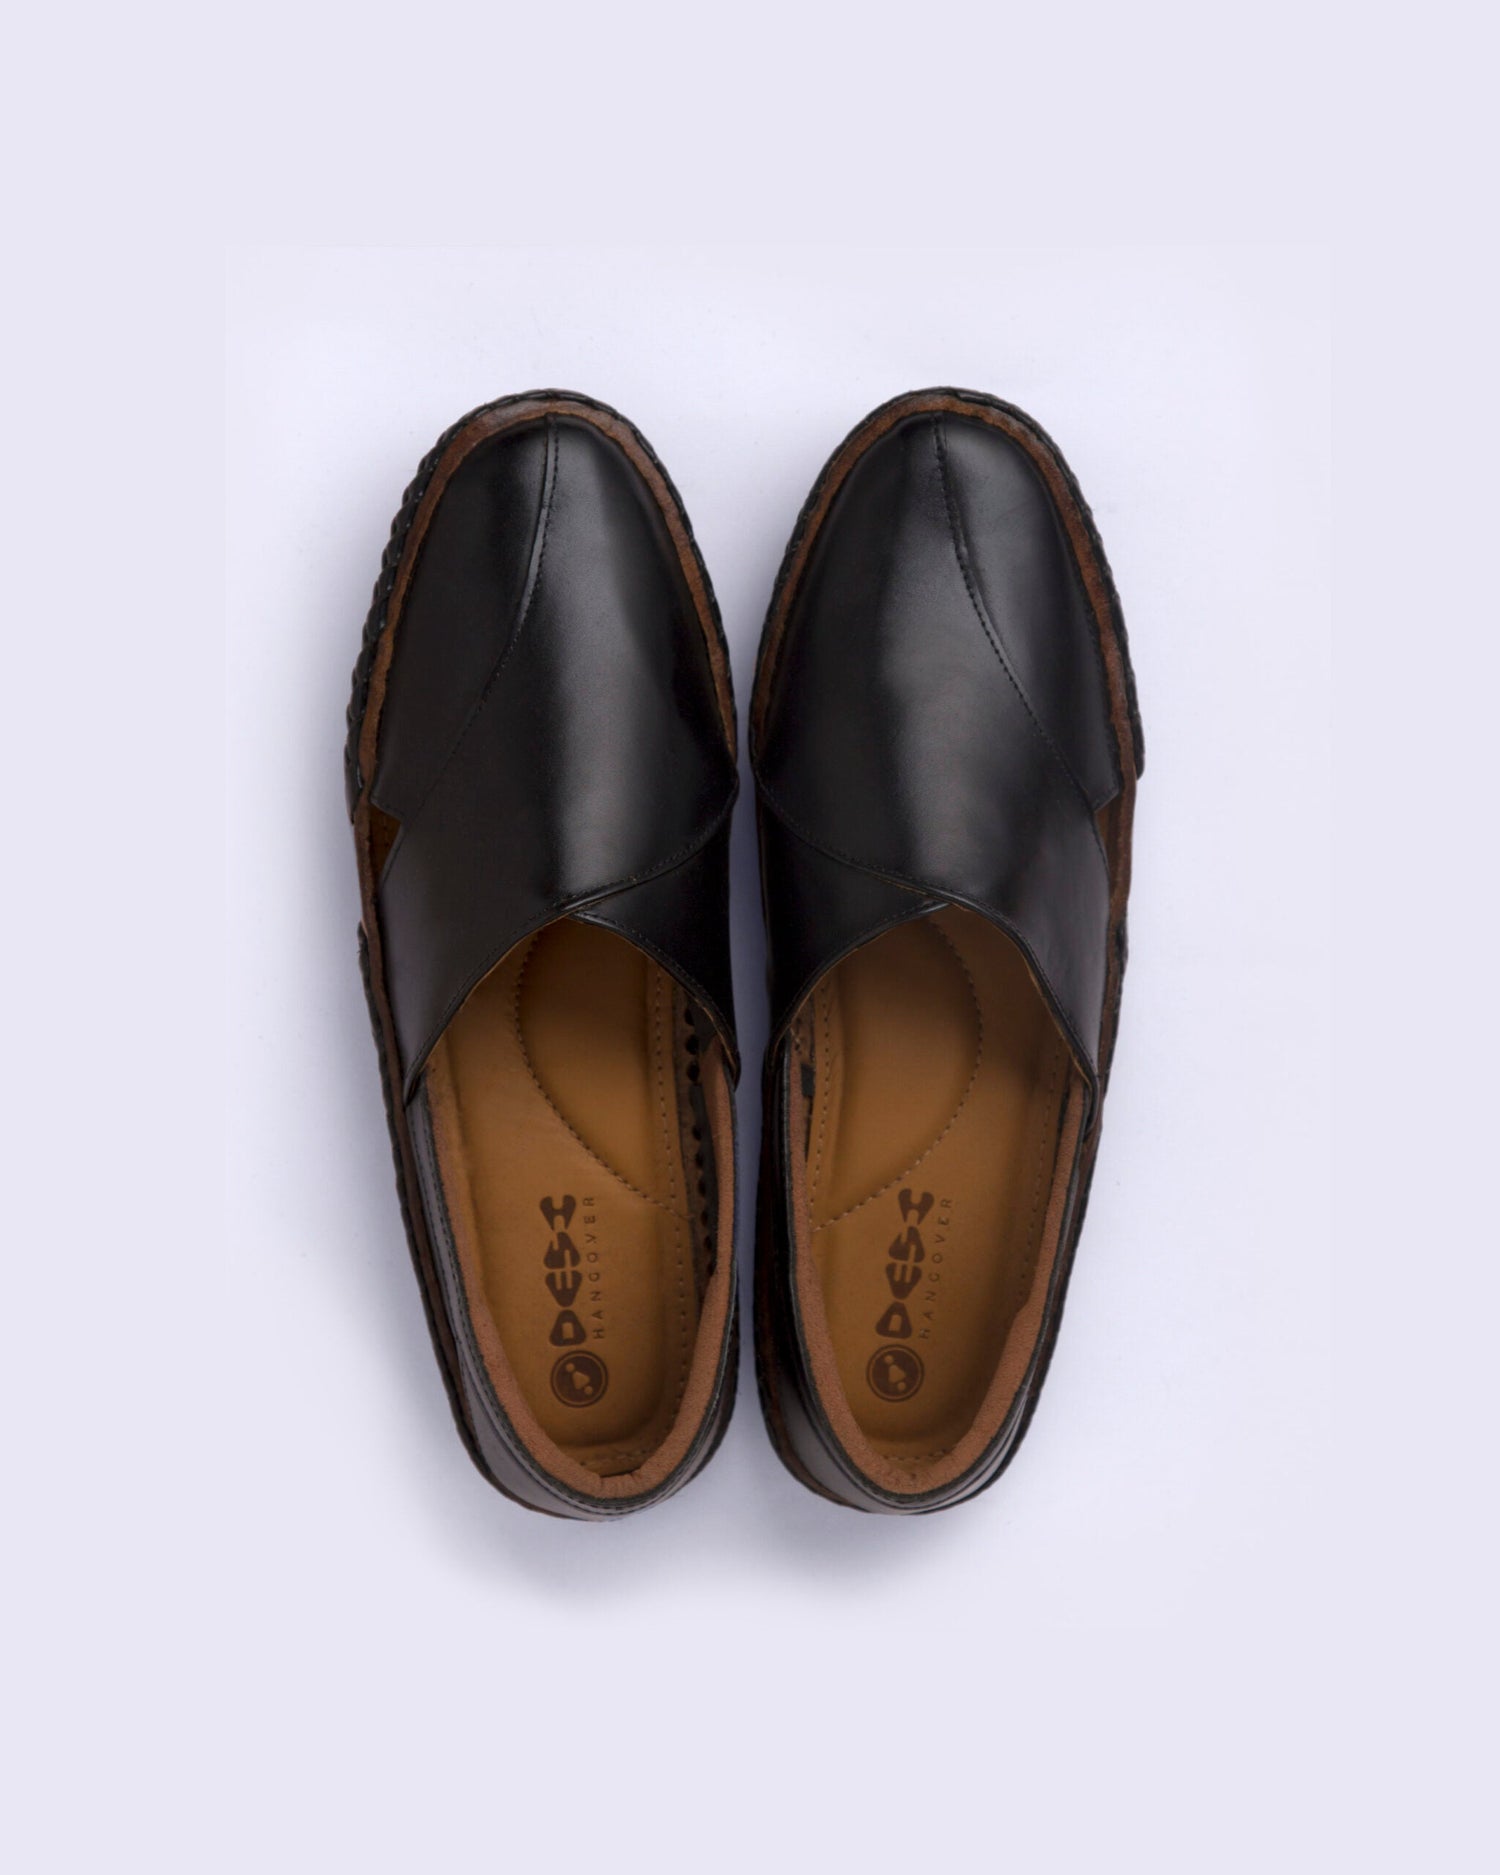 August leather loafers Black